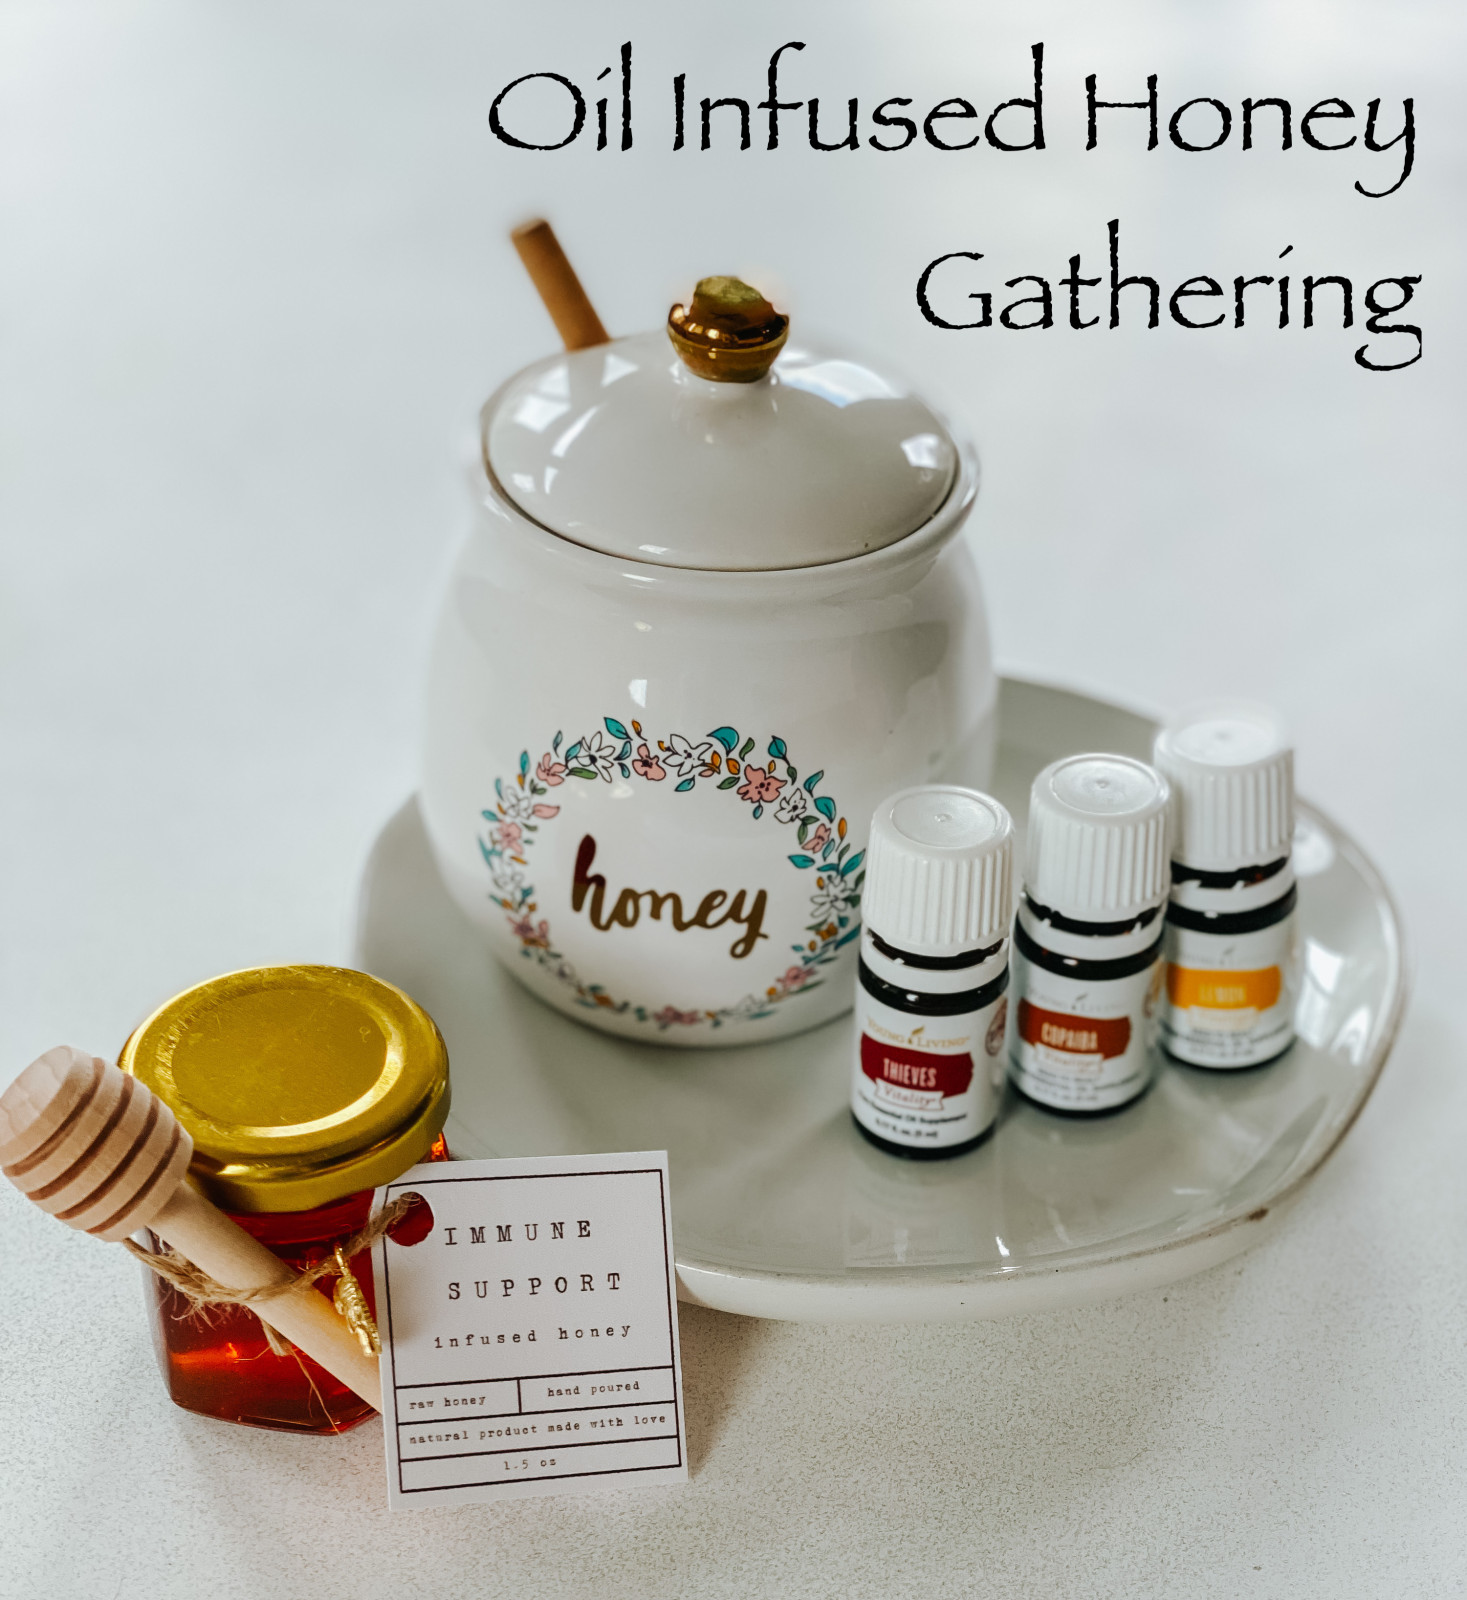 Oil Infused Honey Gathering